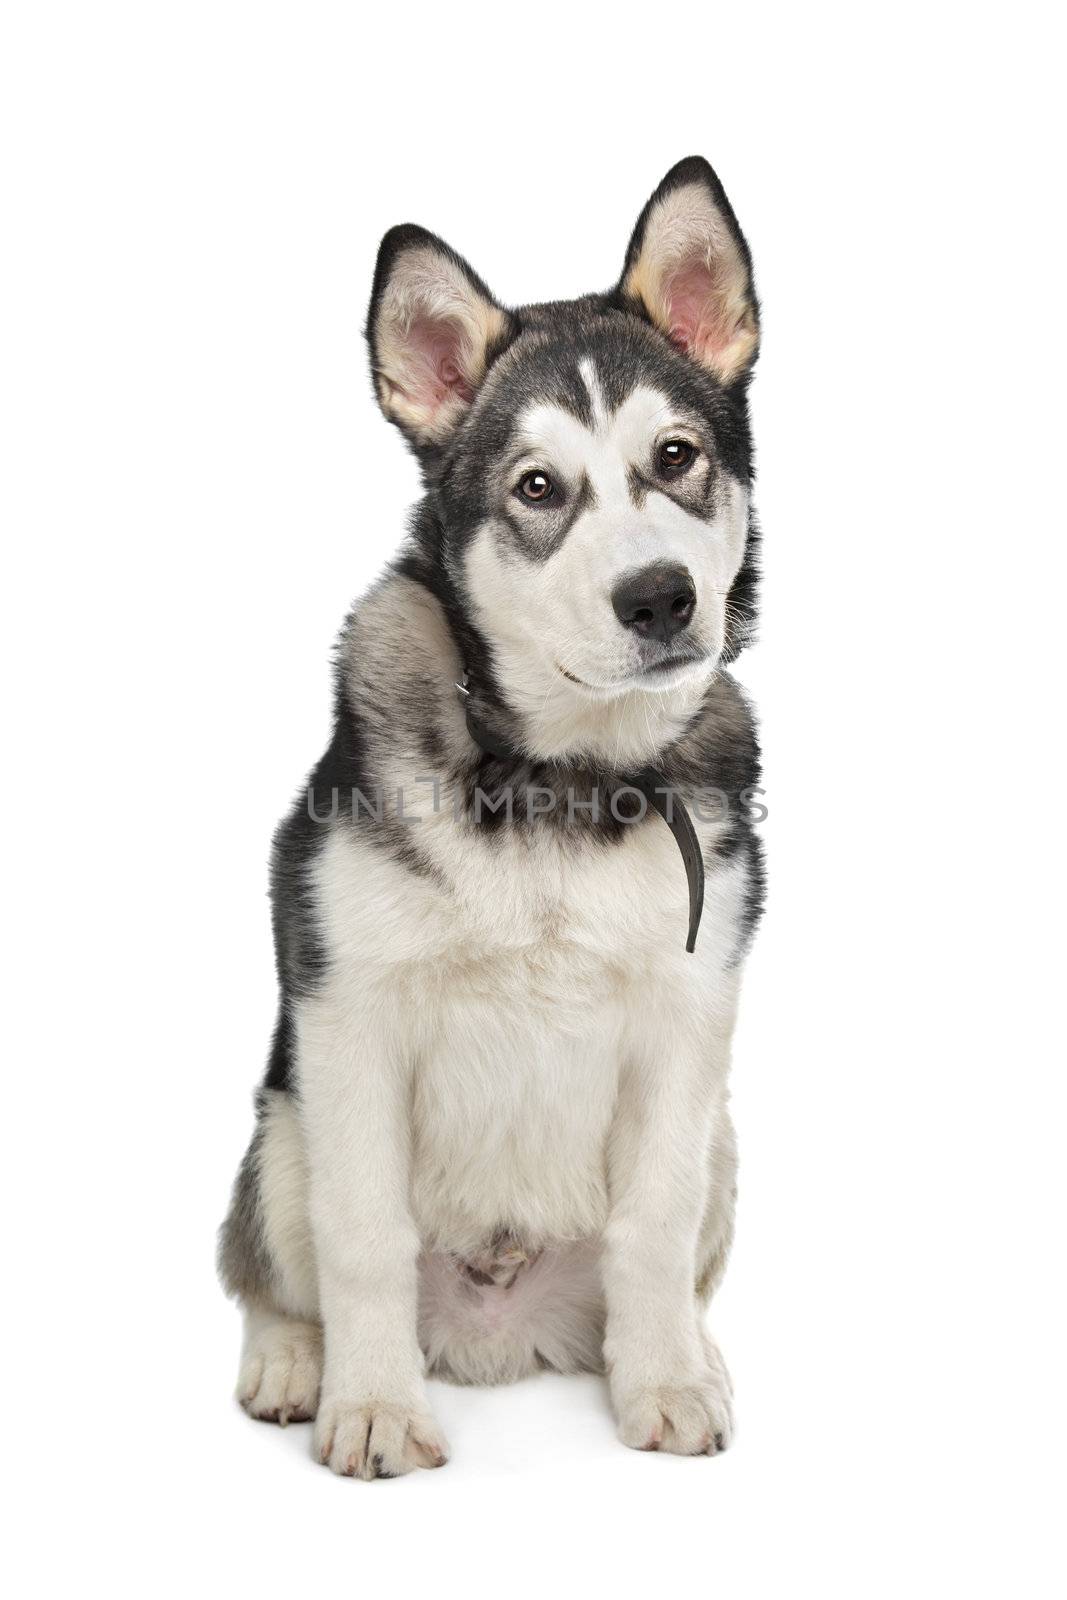 Alaskan Malamute puppy in front of a white background